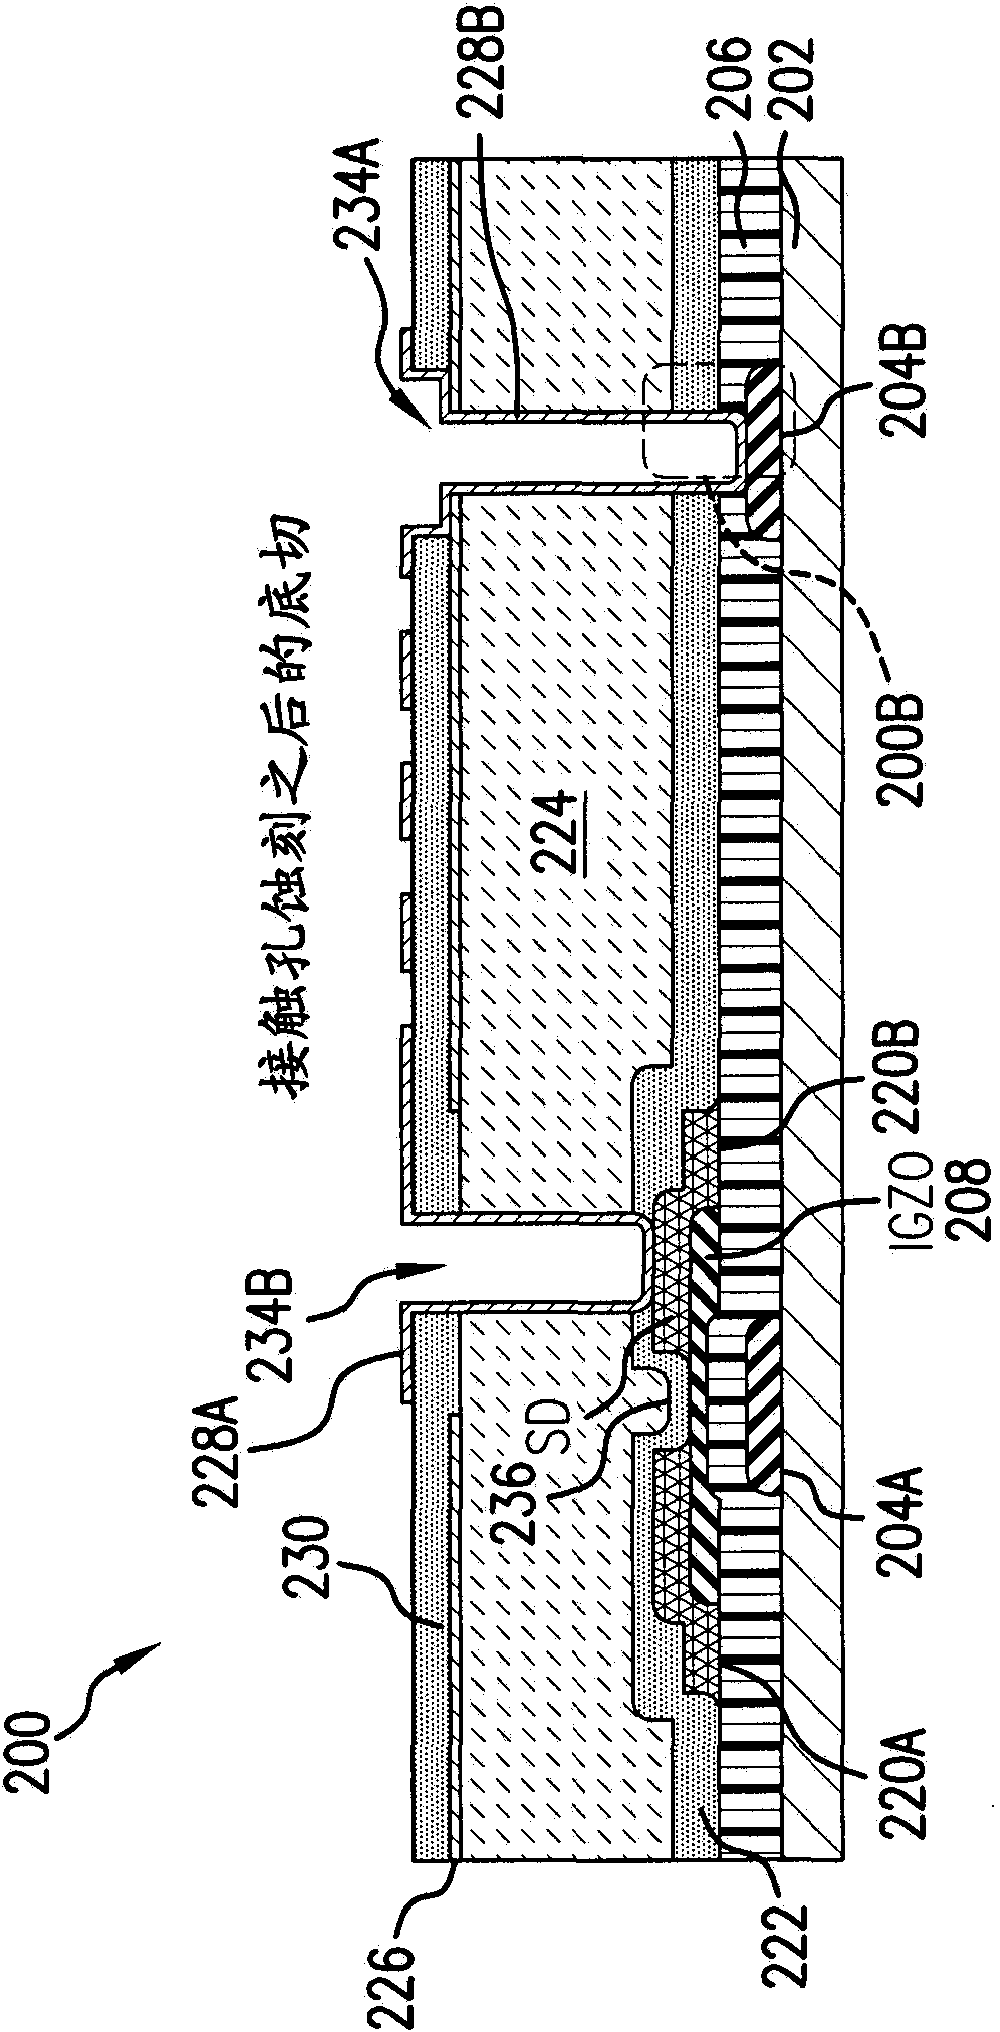 Back channel etching oxide thin film transistor process architecture